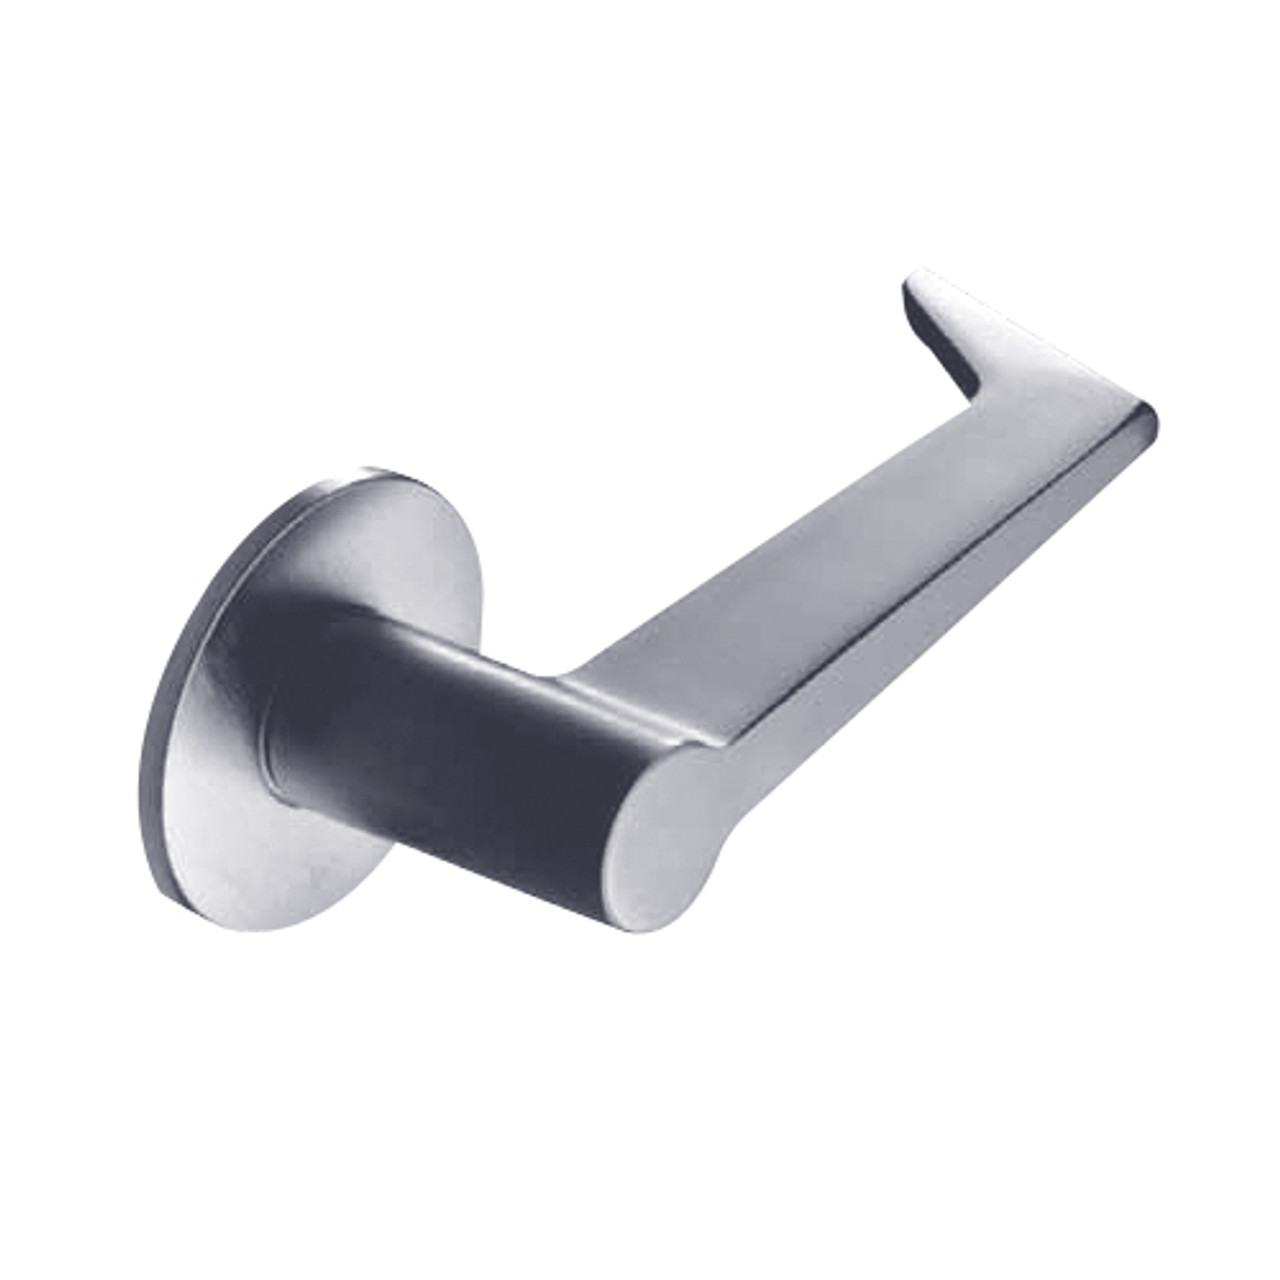 ML2053-ESA-625-M31 Corbin Russwin ML2000 Series Mortise Entrance Trim Pack with Essex Lever in Bright Chrome